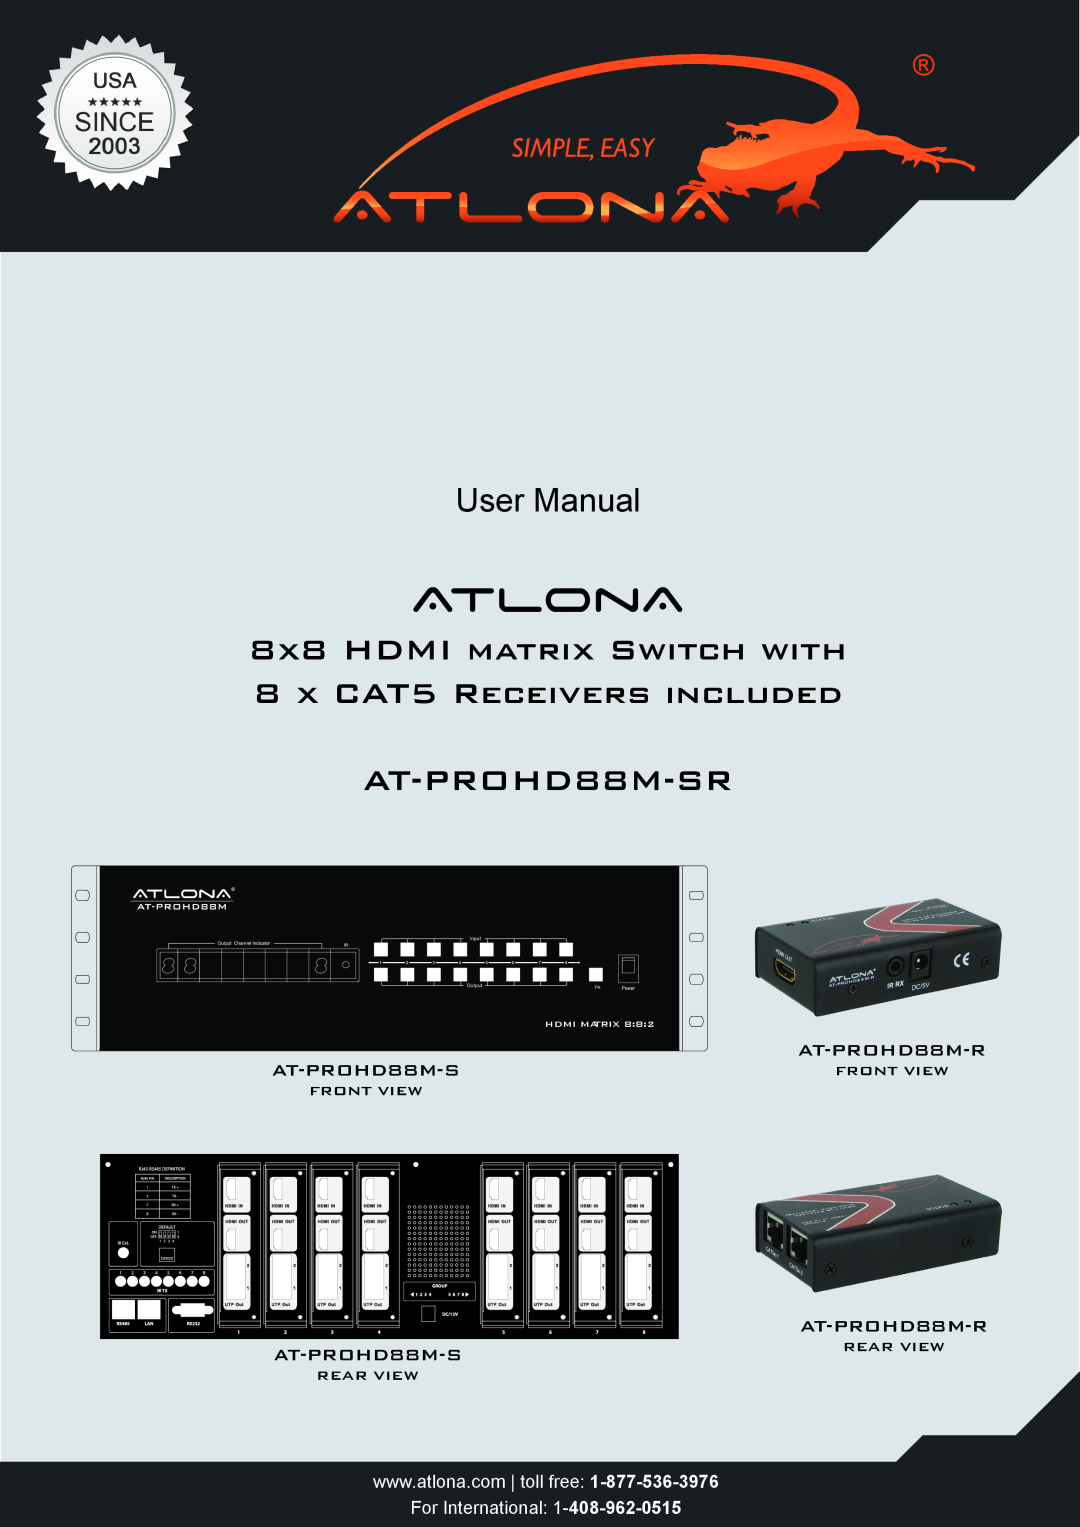 Atlona AT-PROHD88M-SR user manual Atlona, 8X8 HDMI MATRIX SWITCH WITH 8 X CAT5 RECEIVERS INCLUDED, User Manual, Front View 